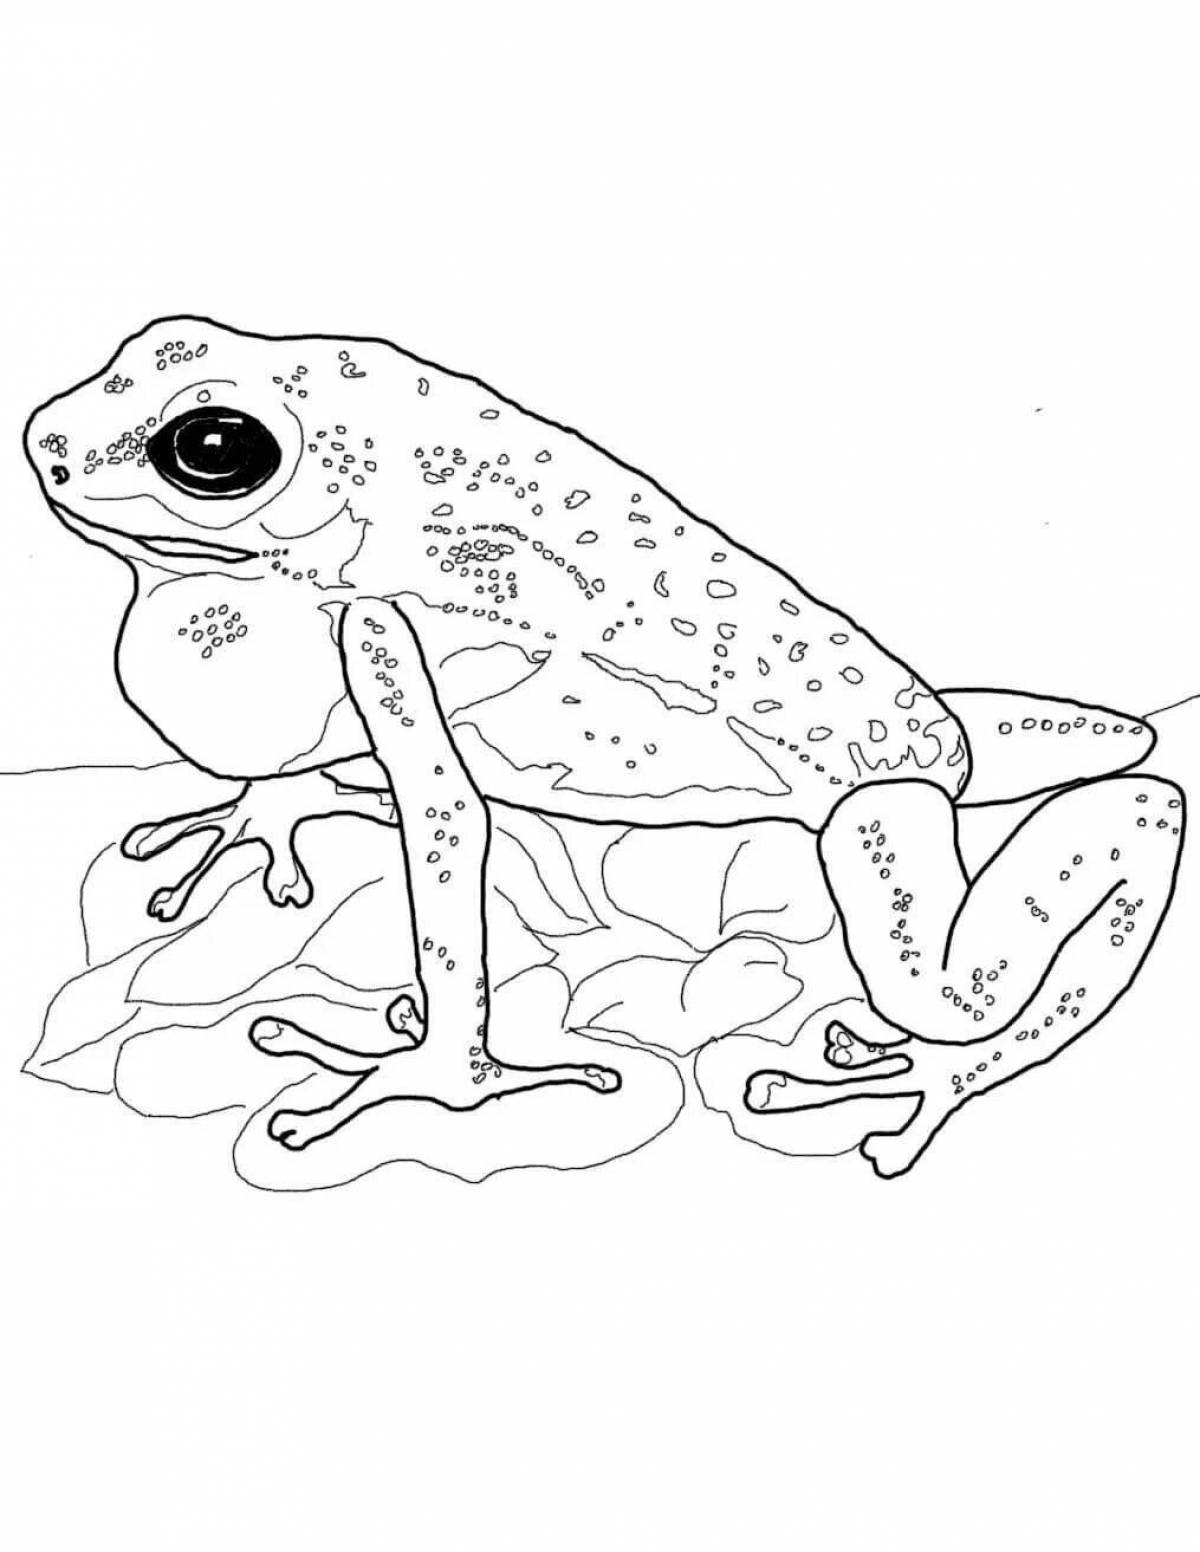 Fine Dart Frog Coloring Page